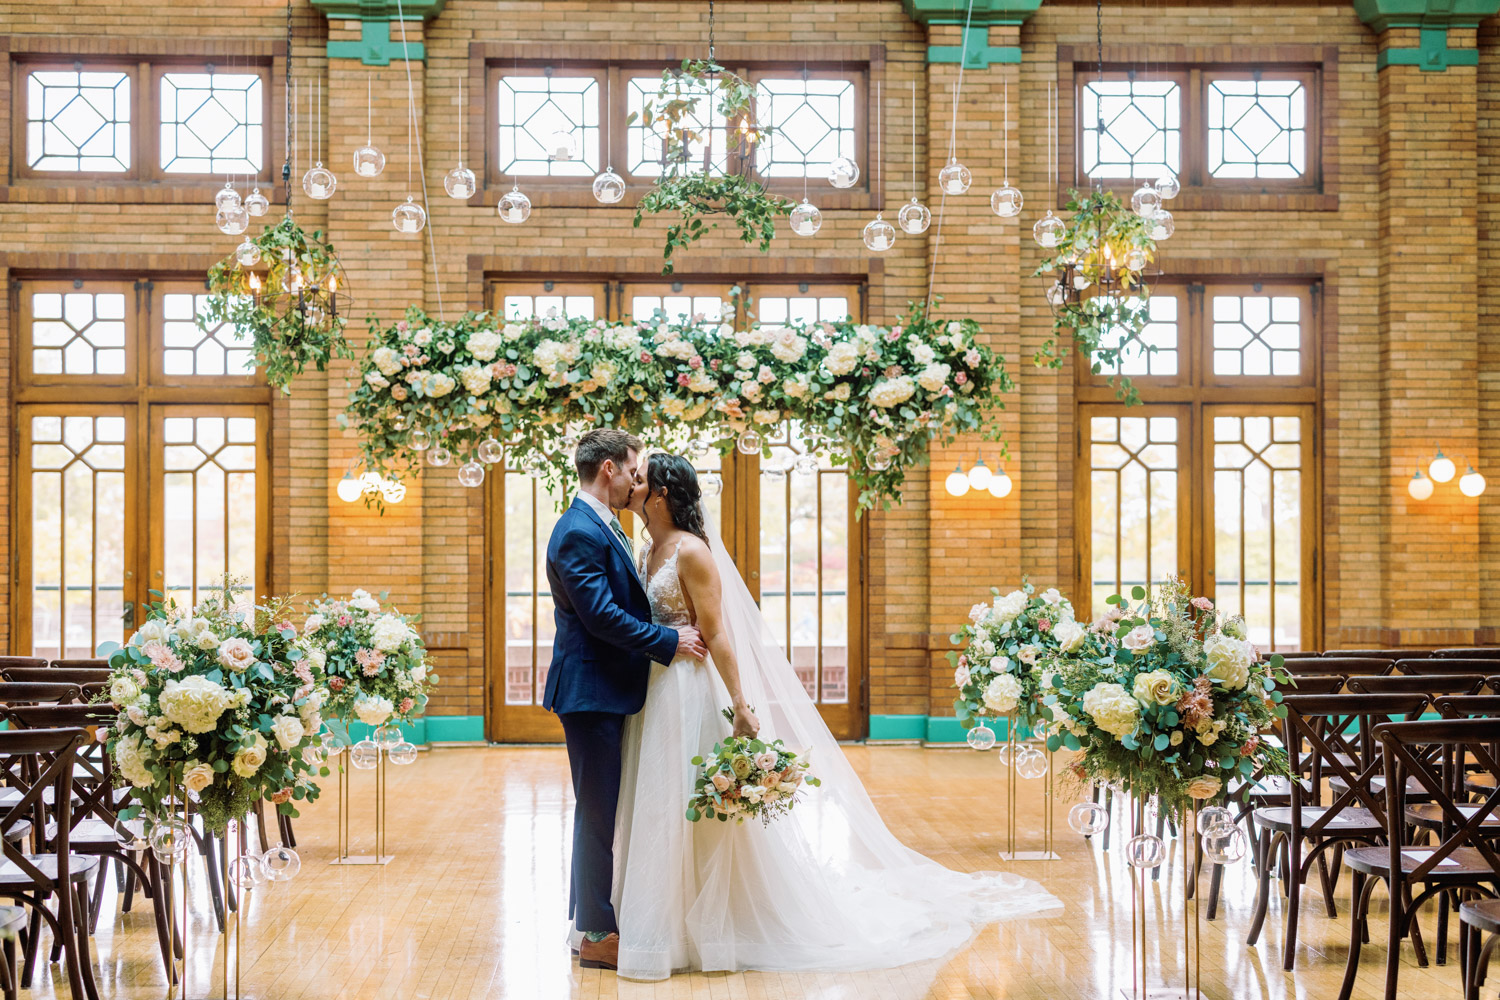 Wedding aisle portraits at Cafe Brauer